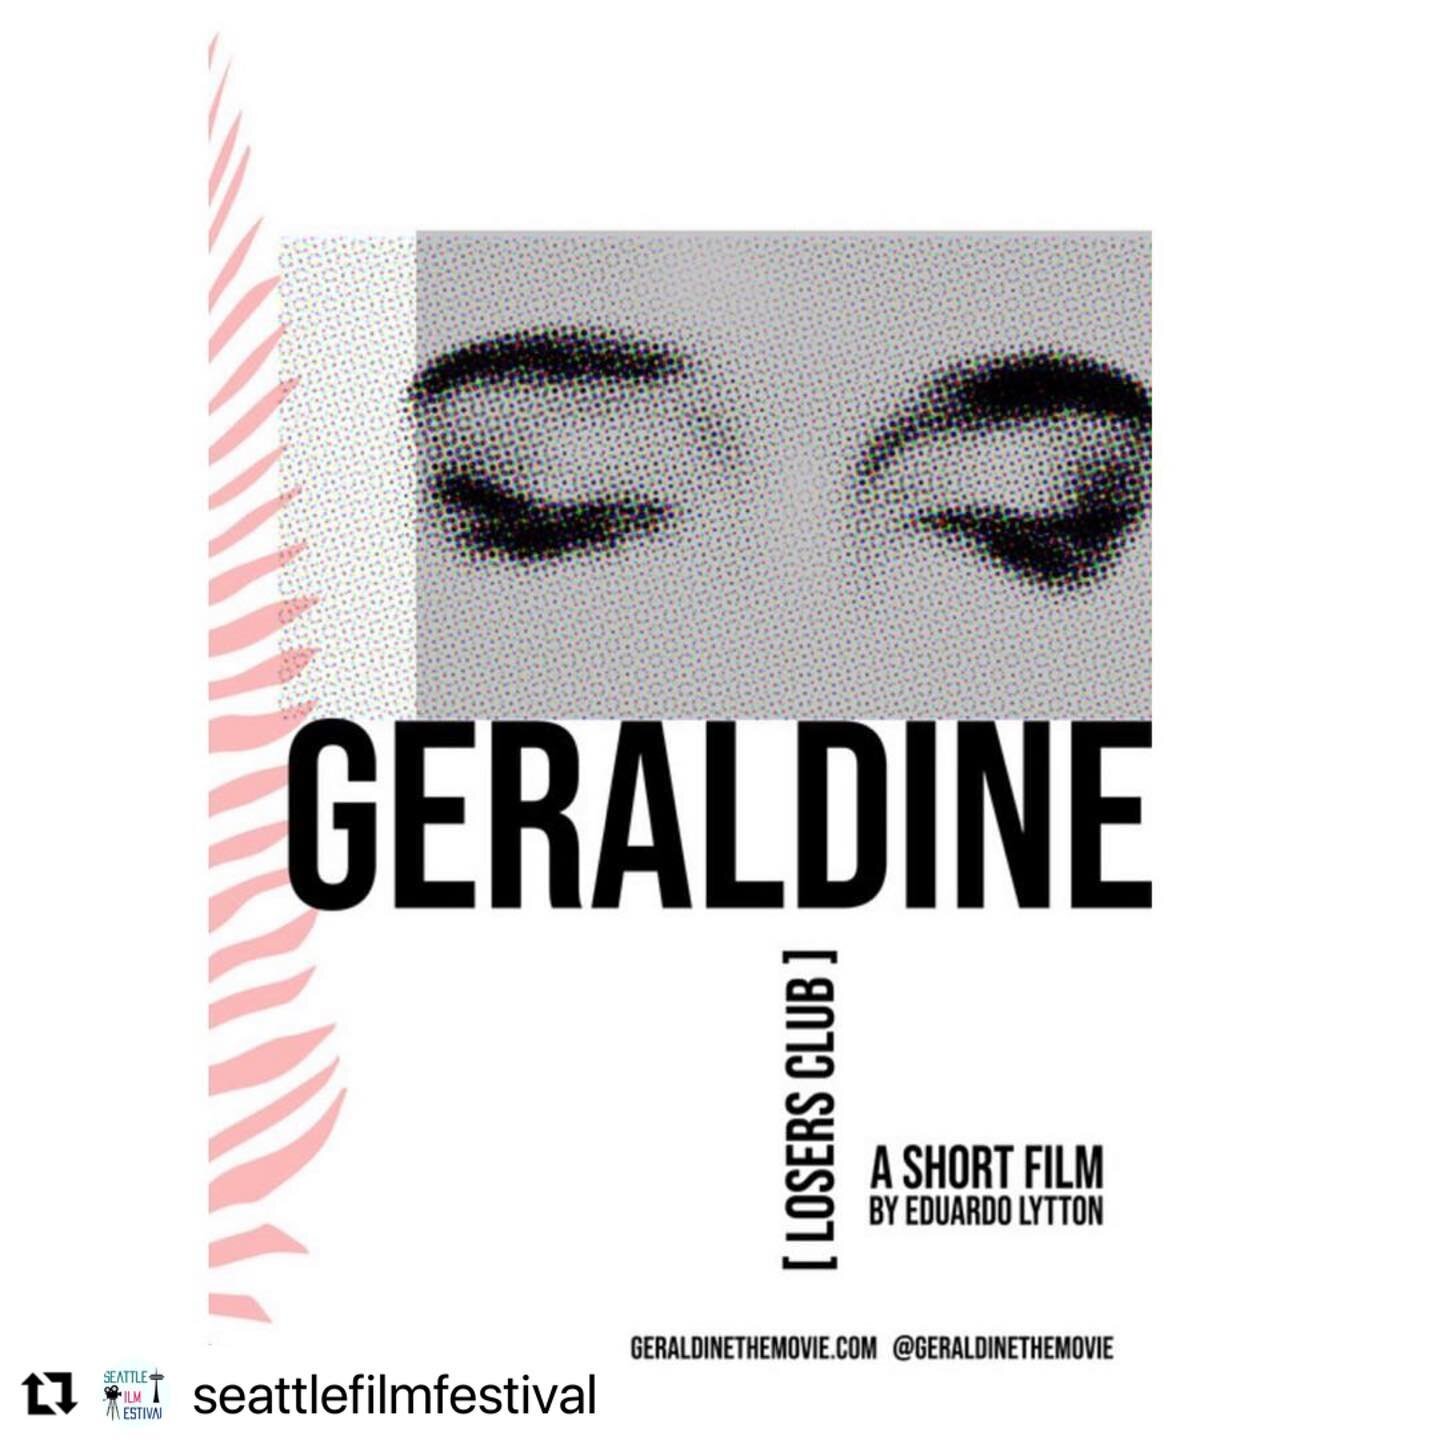 hello! been busy raising babies and working on next script! In the meantime, reposting this from @seattlefilmfestival. Super positive experience with them~ hope to make it there in person next time. thanks for highlighting us and for doing what you d